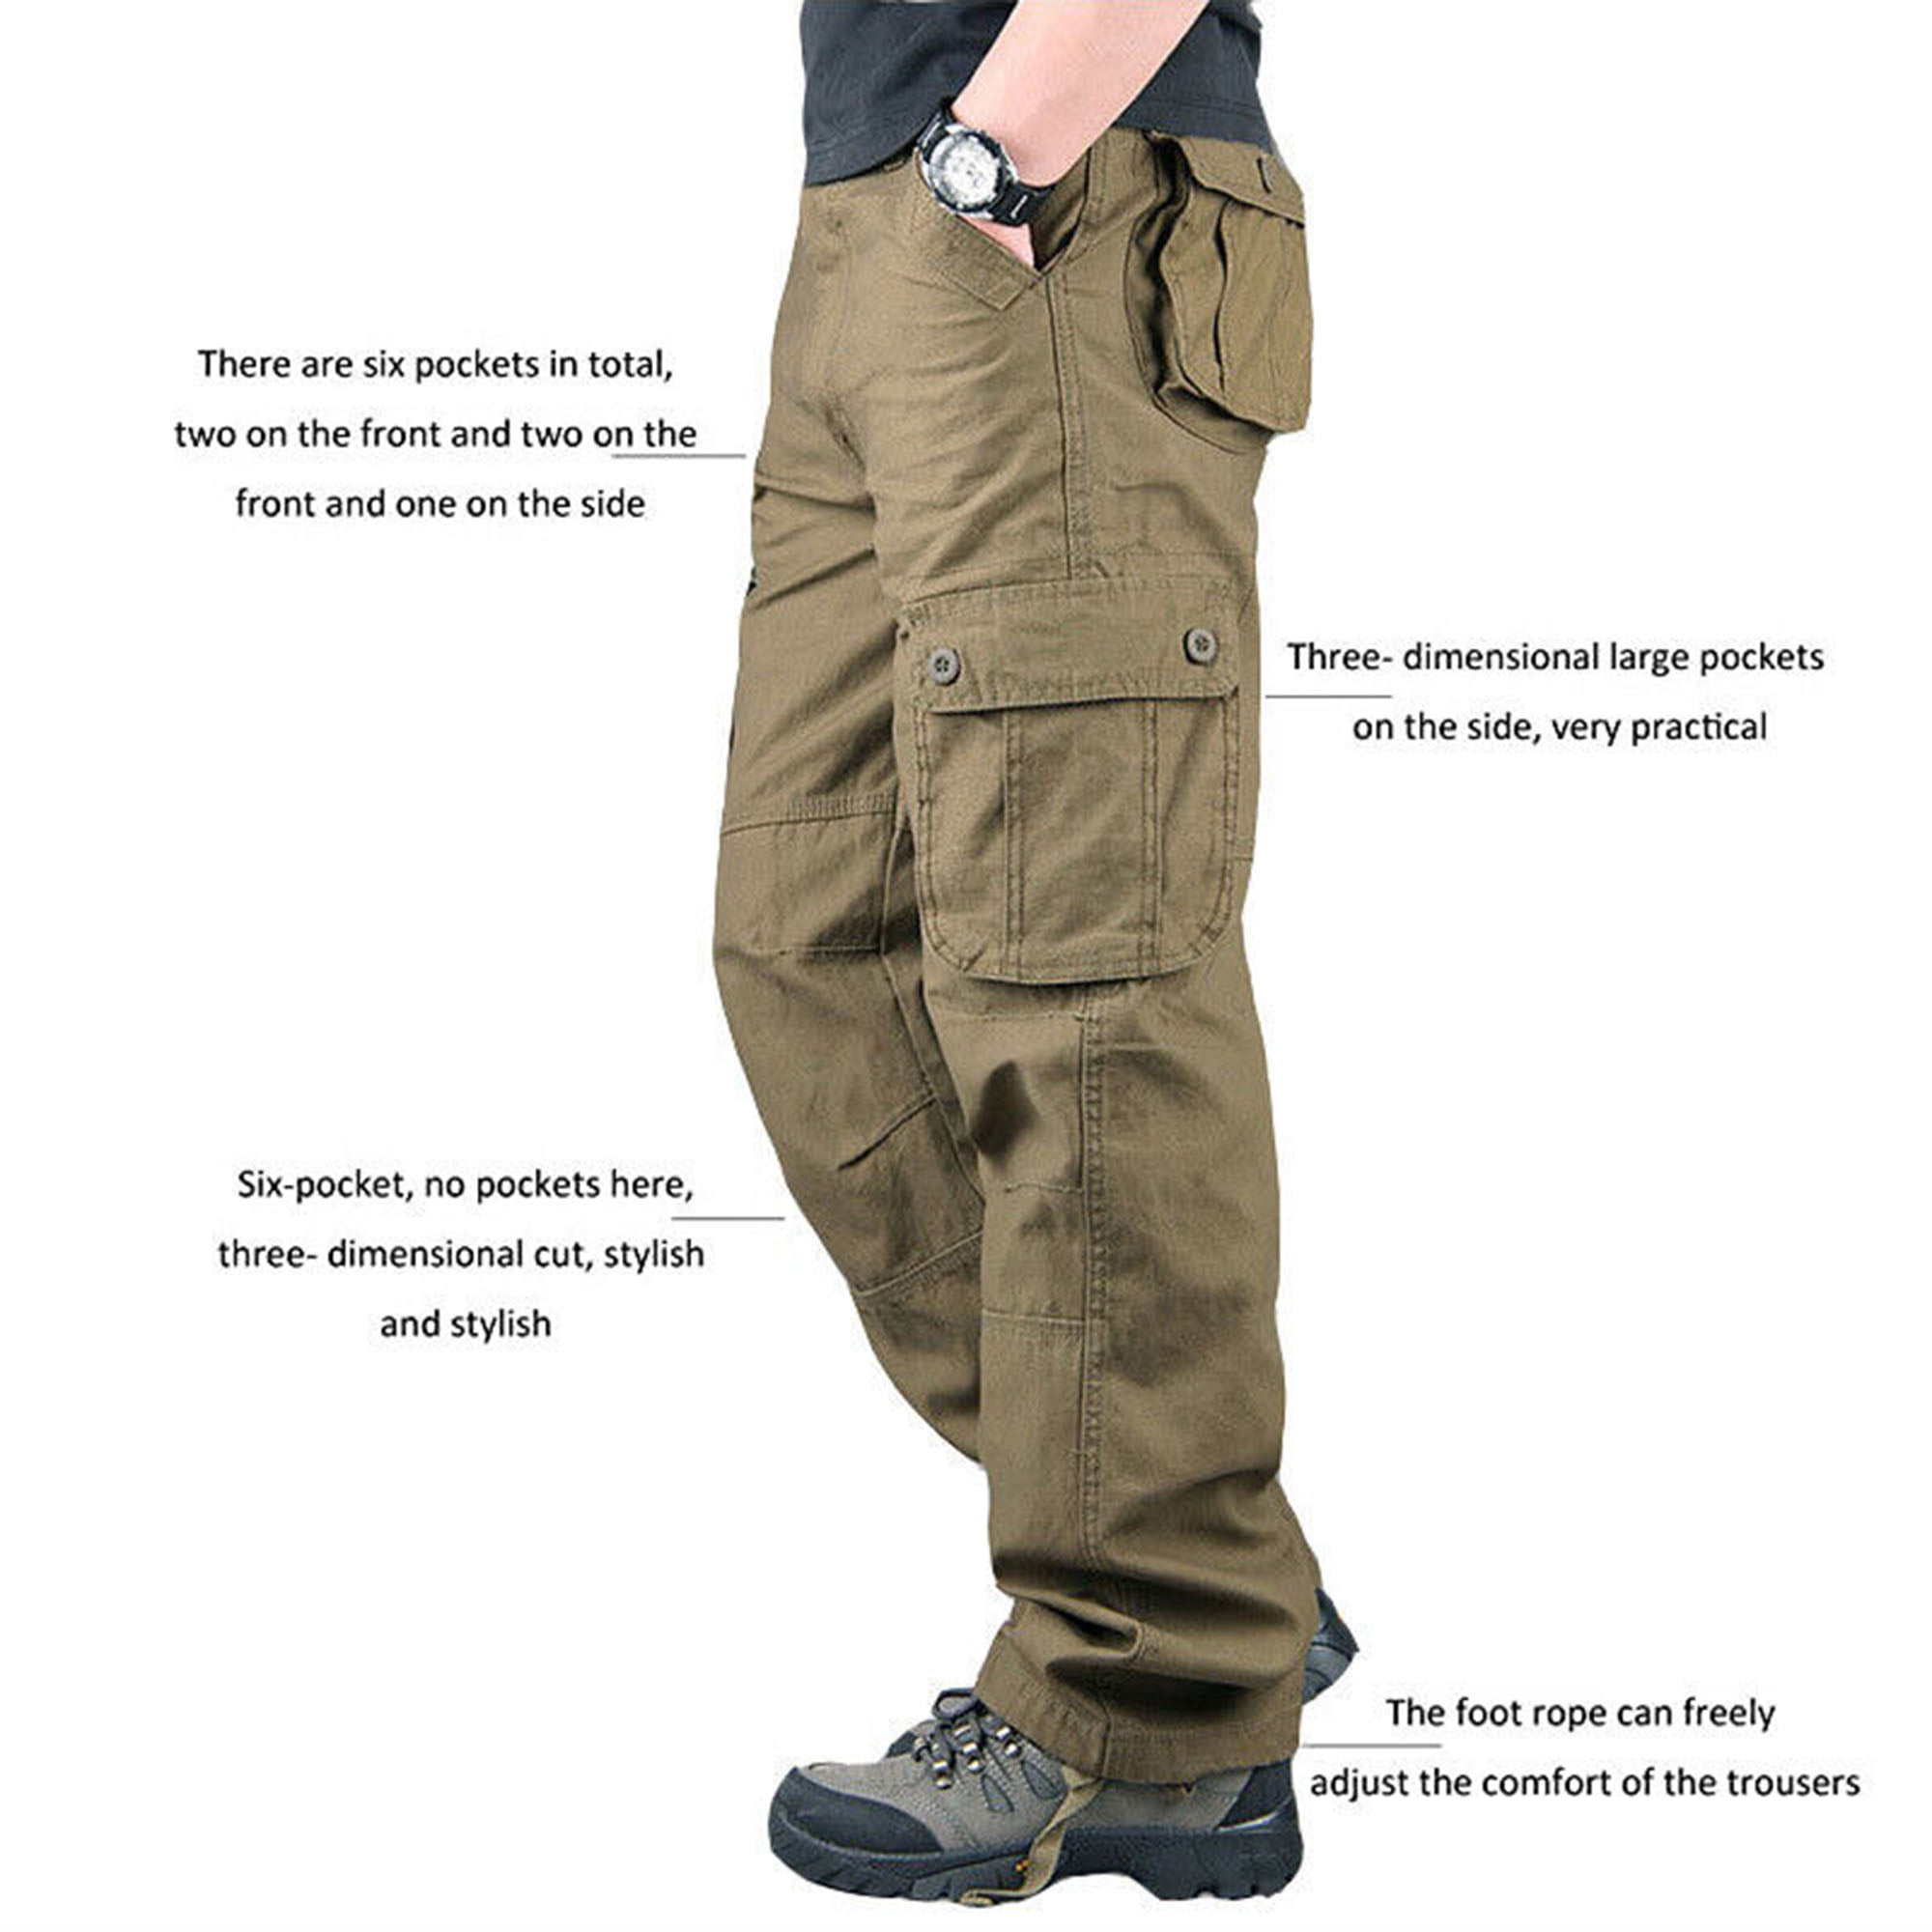 LELINTA Men's Cargo Pants with Pockets Casual Military Cargo Work Pants  Trousers Outdoor Tactical Pants Rip Stop Lightweight Military Combat Cargo  Work Hiking Pants 